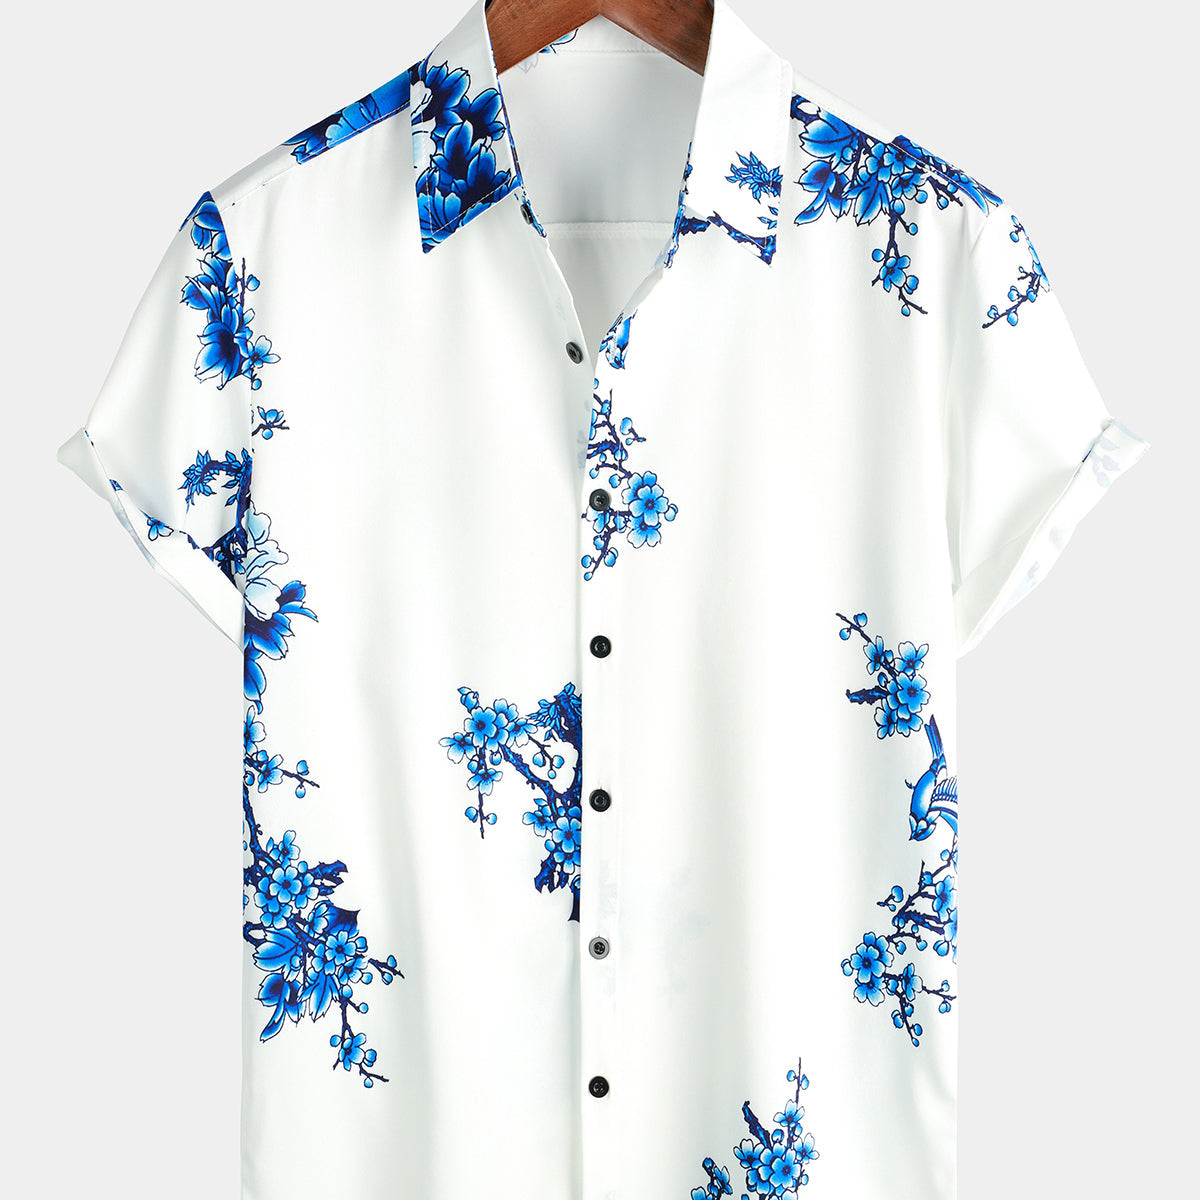 Men's Blue Floral Printed Button Up Short Sleeve Casual Shirt